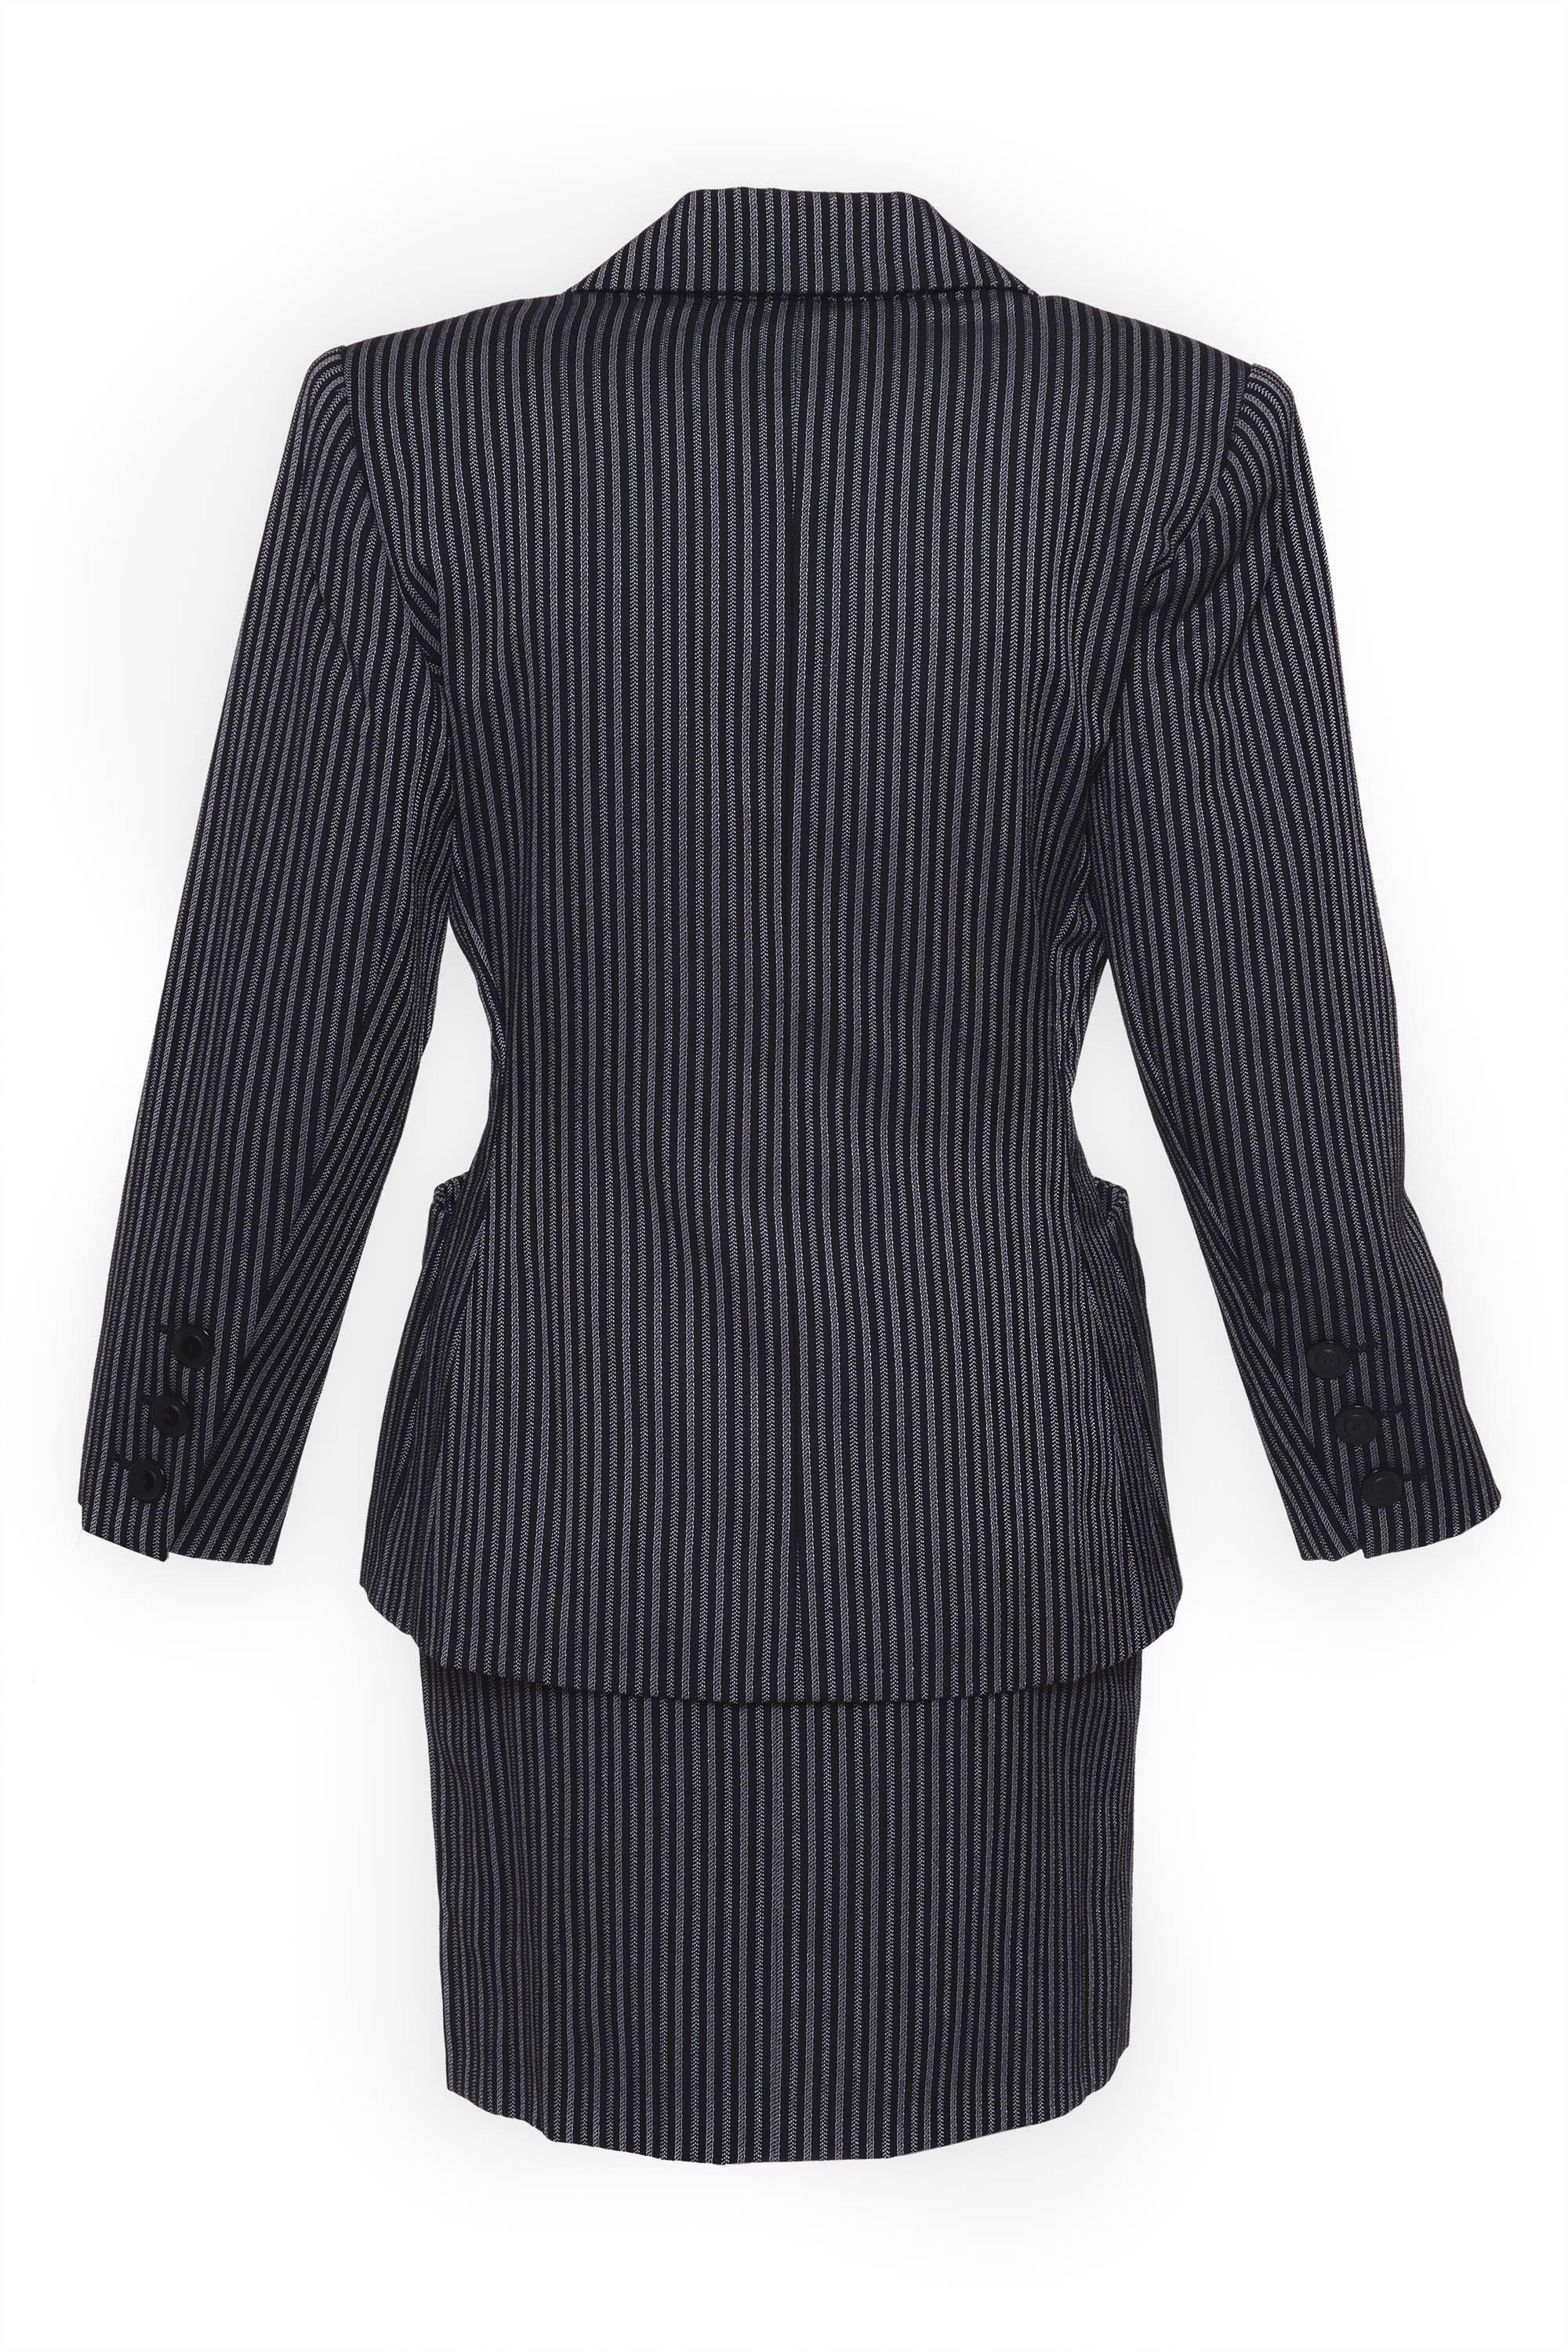 1980s Saint Laurent Rive Gauche in a pinstriped print wool gabardine fabric. The jacket has two frontal pocket and two front pocket, it is fully lined. The skirt has two frontal pocket, side zip and hook closure. In a skirt there is a lot of fabric